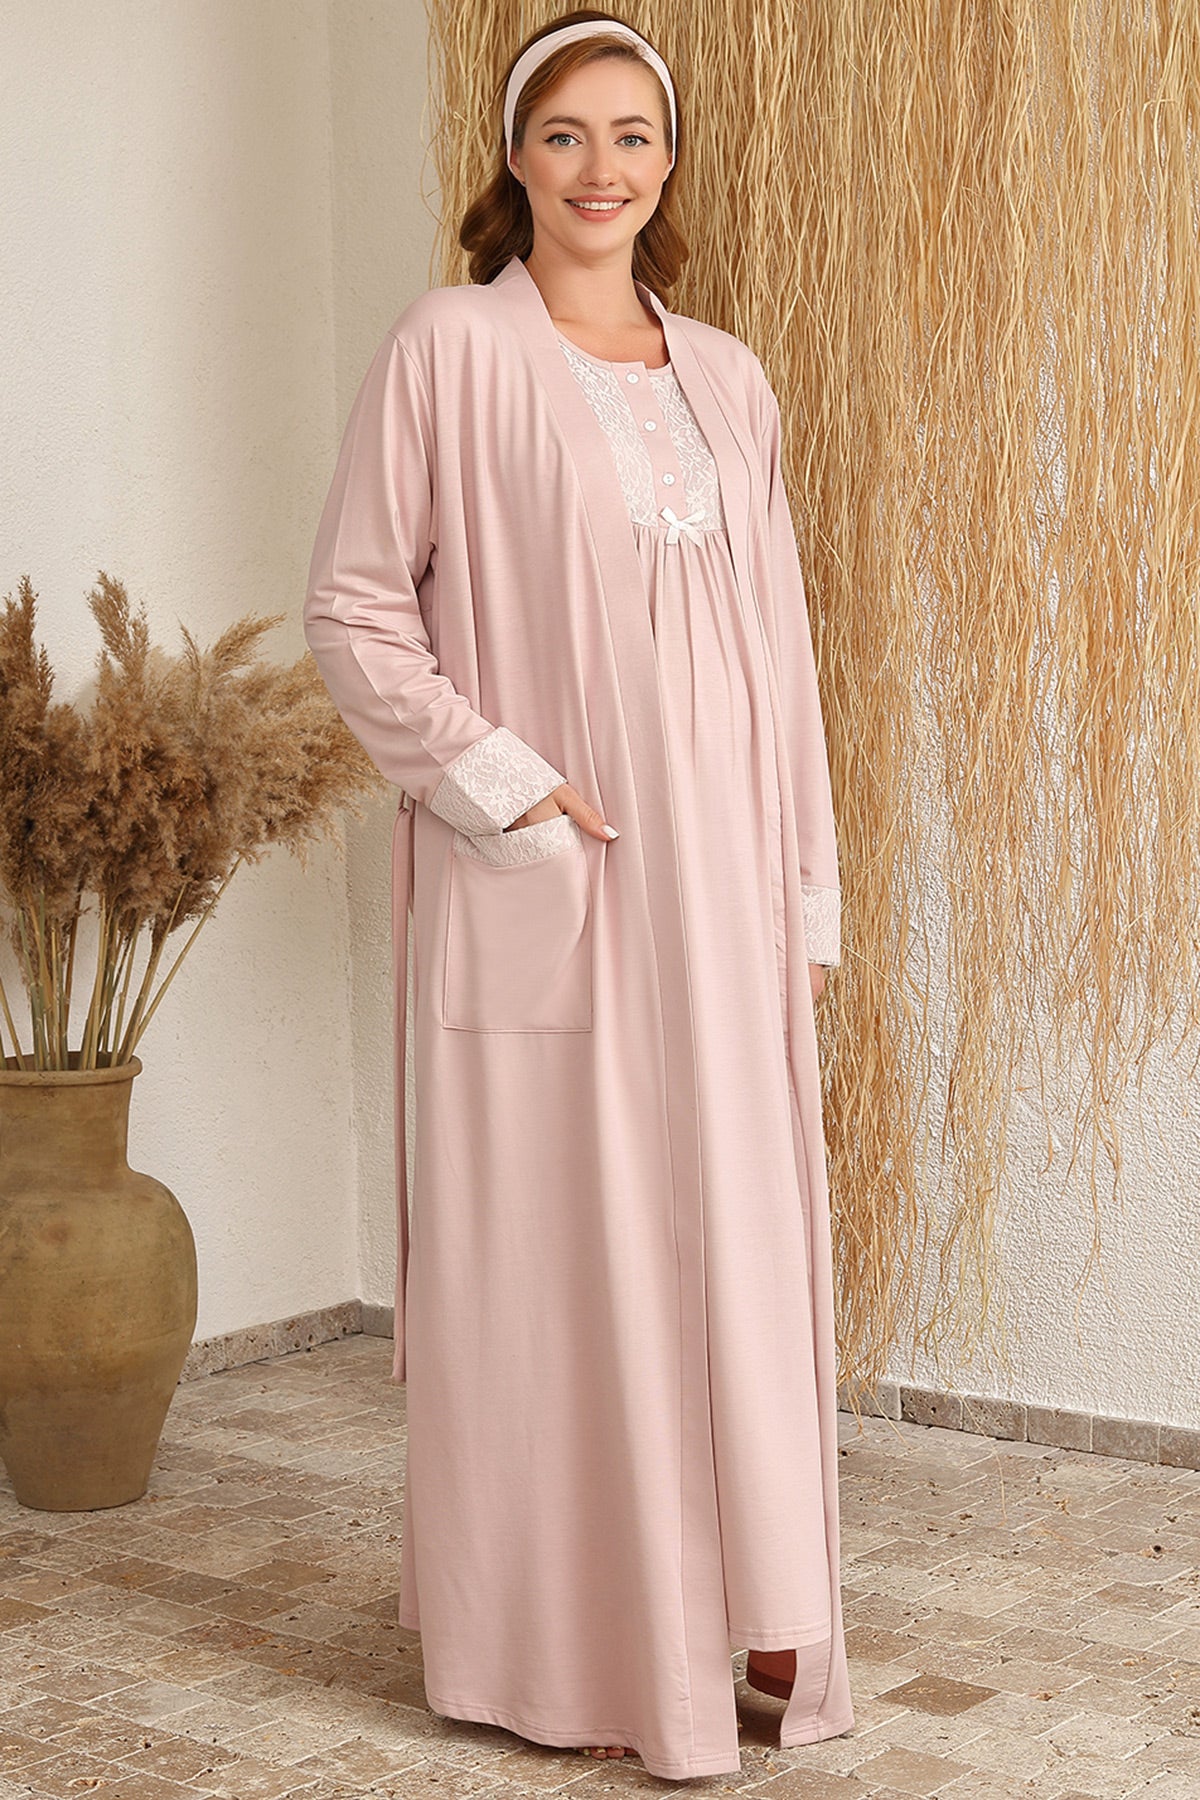 Lace Collar Maternity & Nursing Nightgown With Robe Powder - 4416